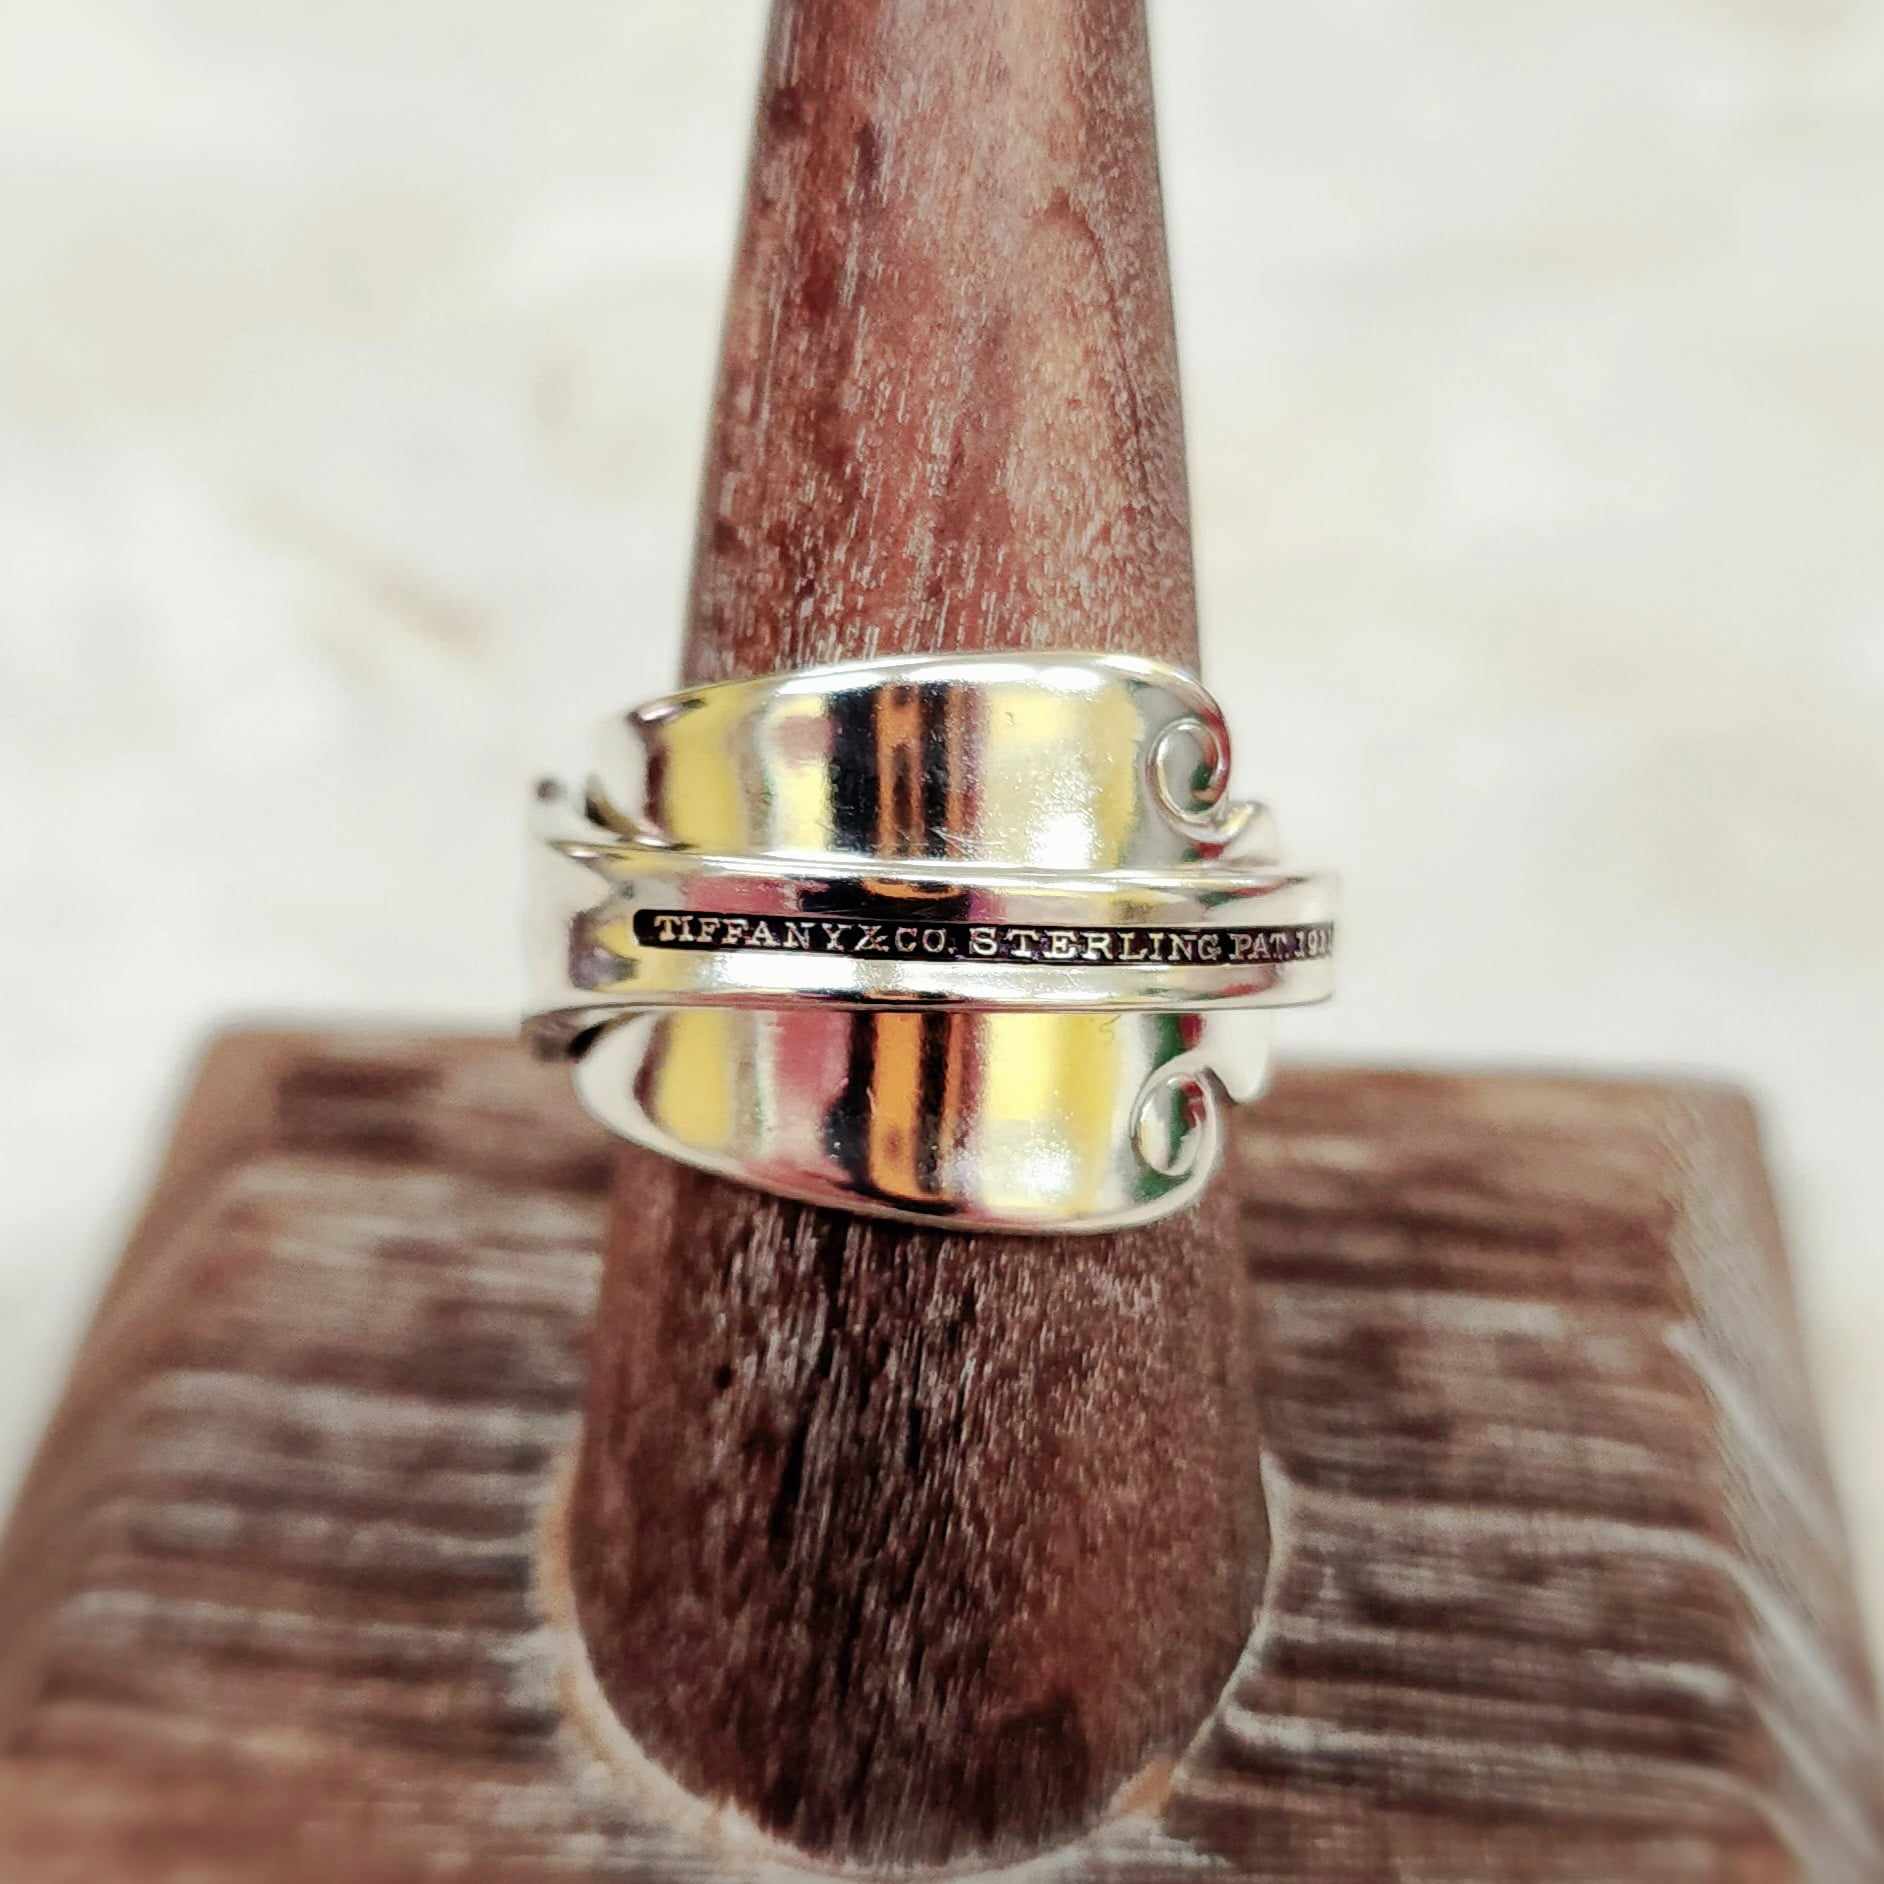 Band spoon rings